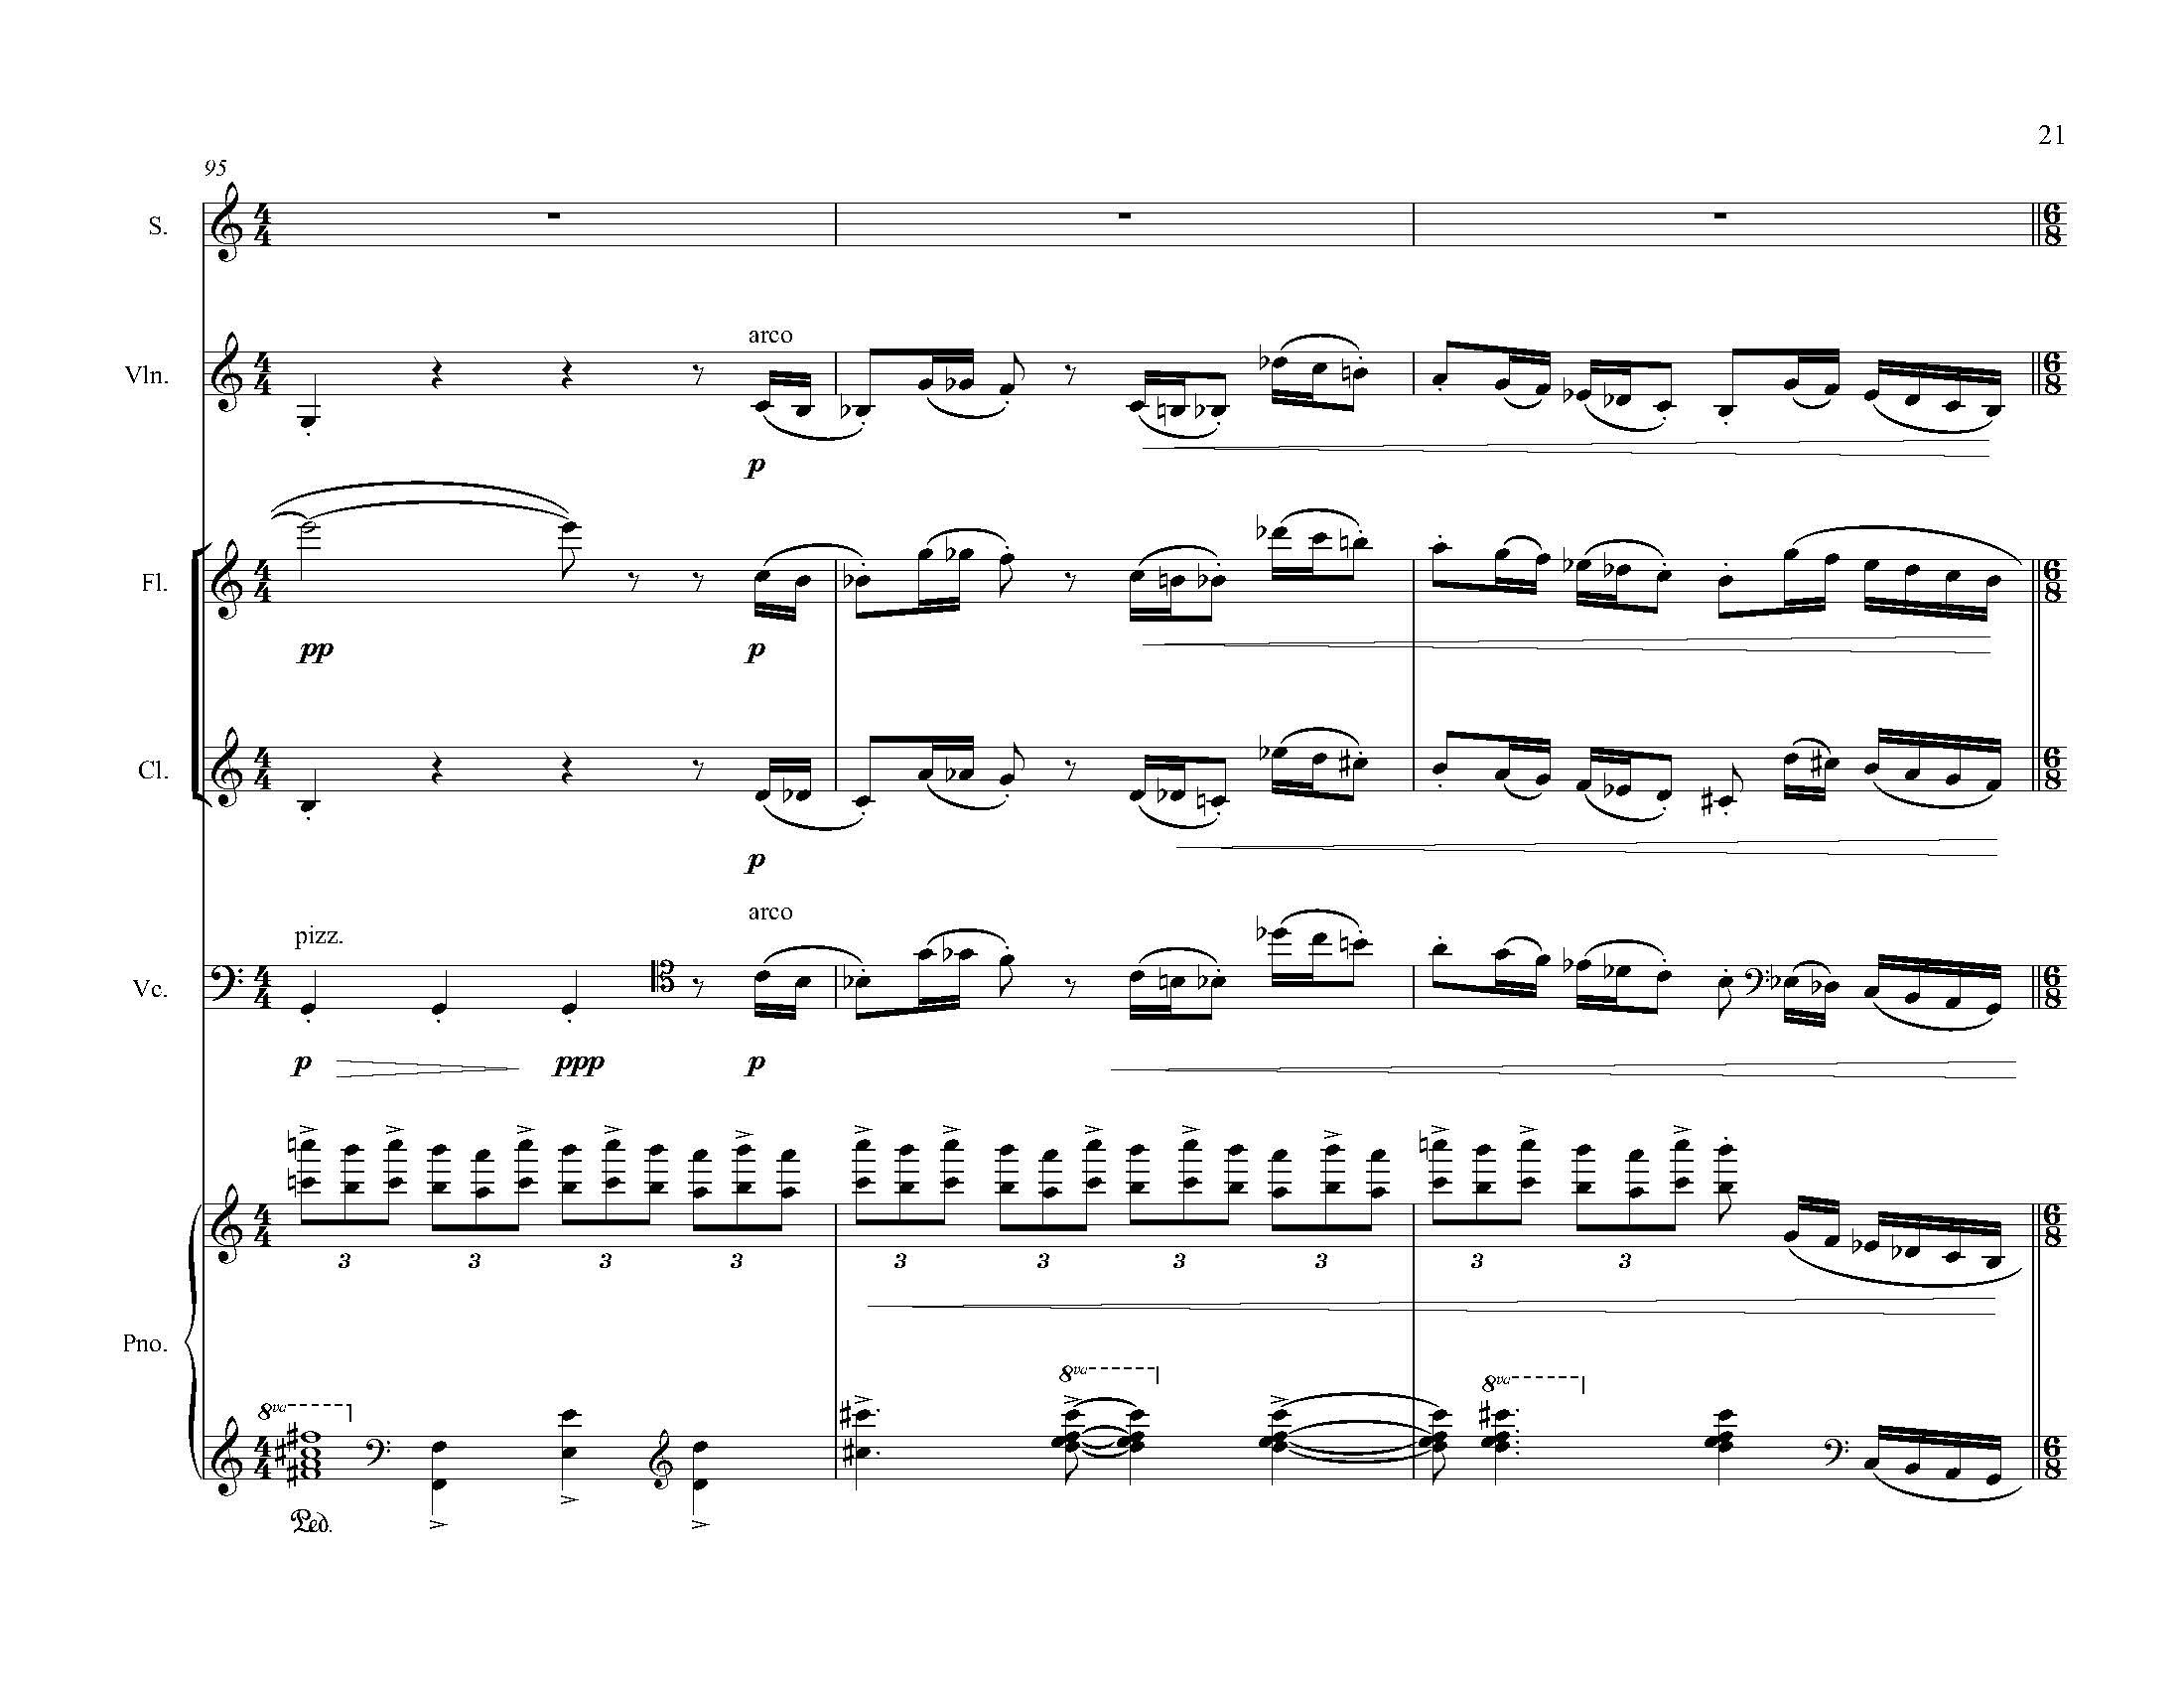 The Hill Wife - Complete Score_Page_029.jpg